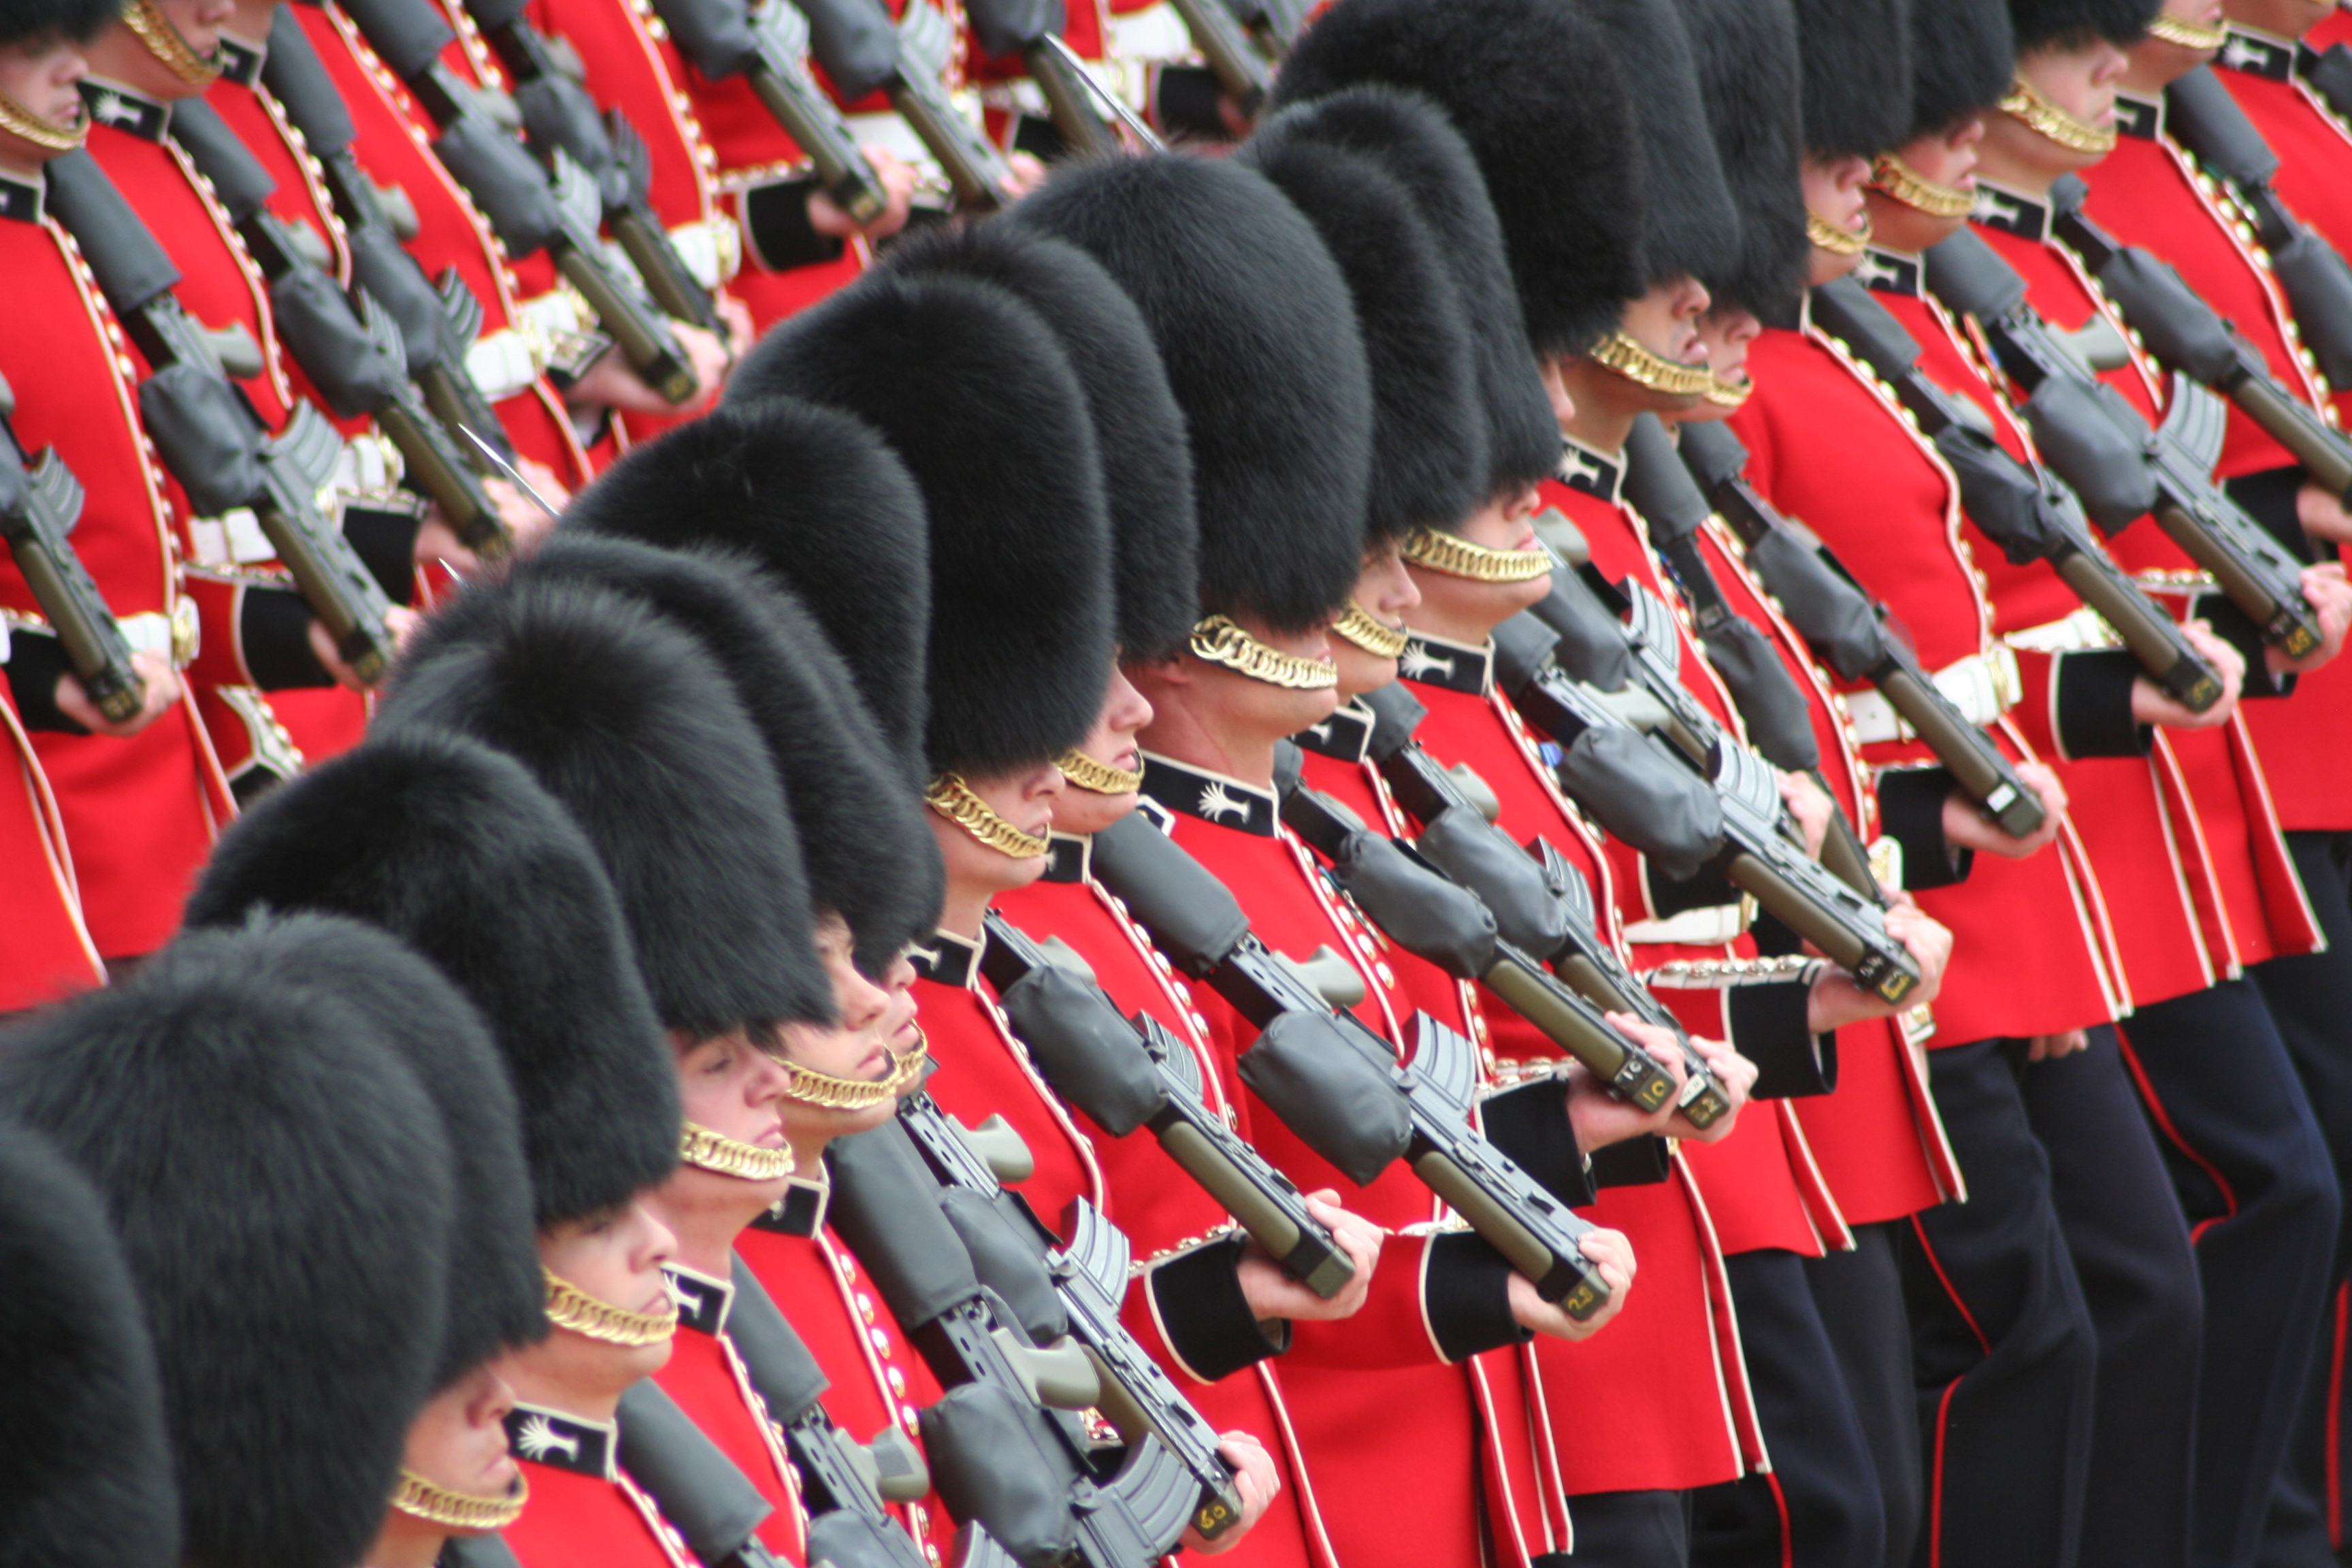 Soldiers_Trooping_the_Colour,_16th_June_2007.jpg